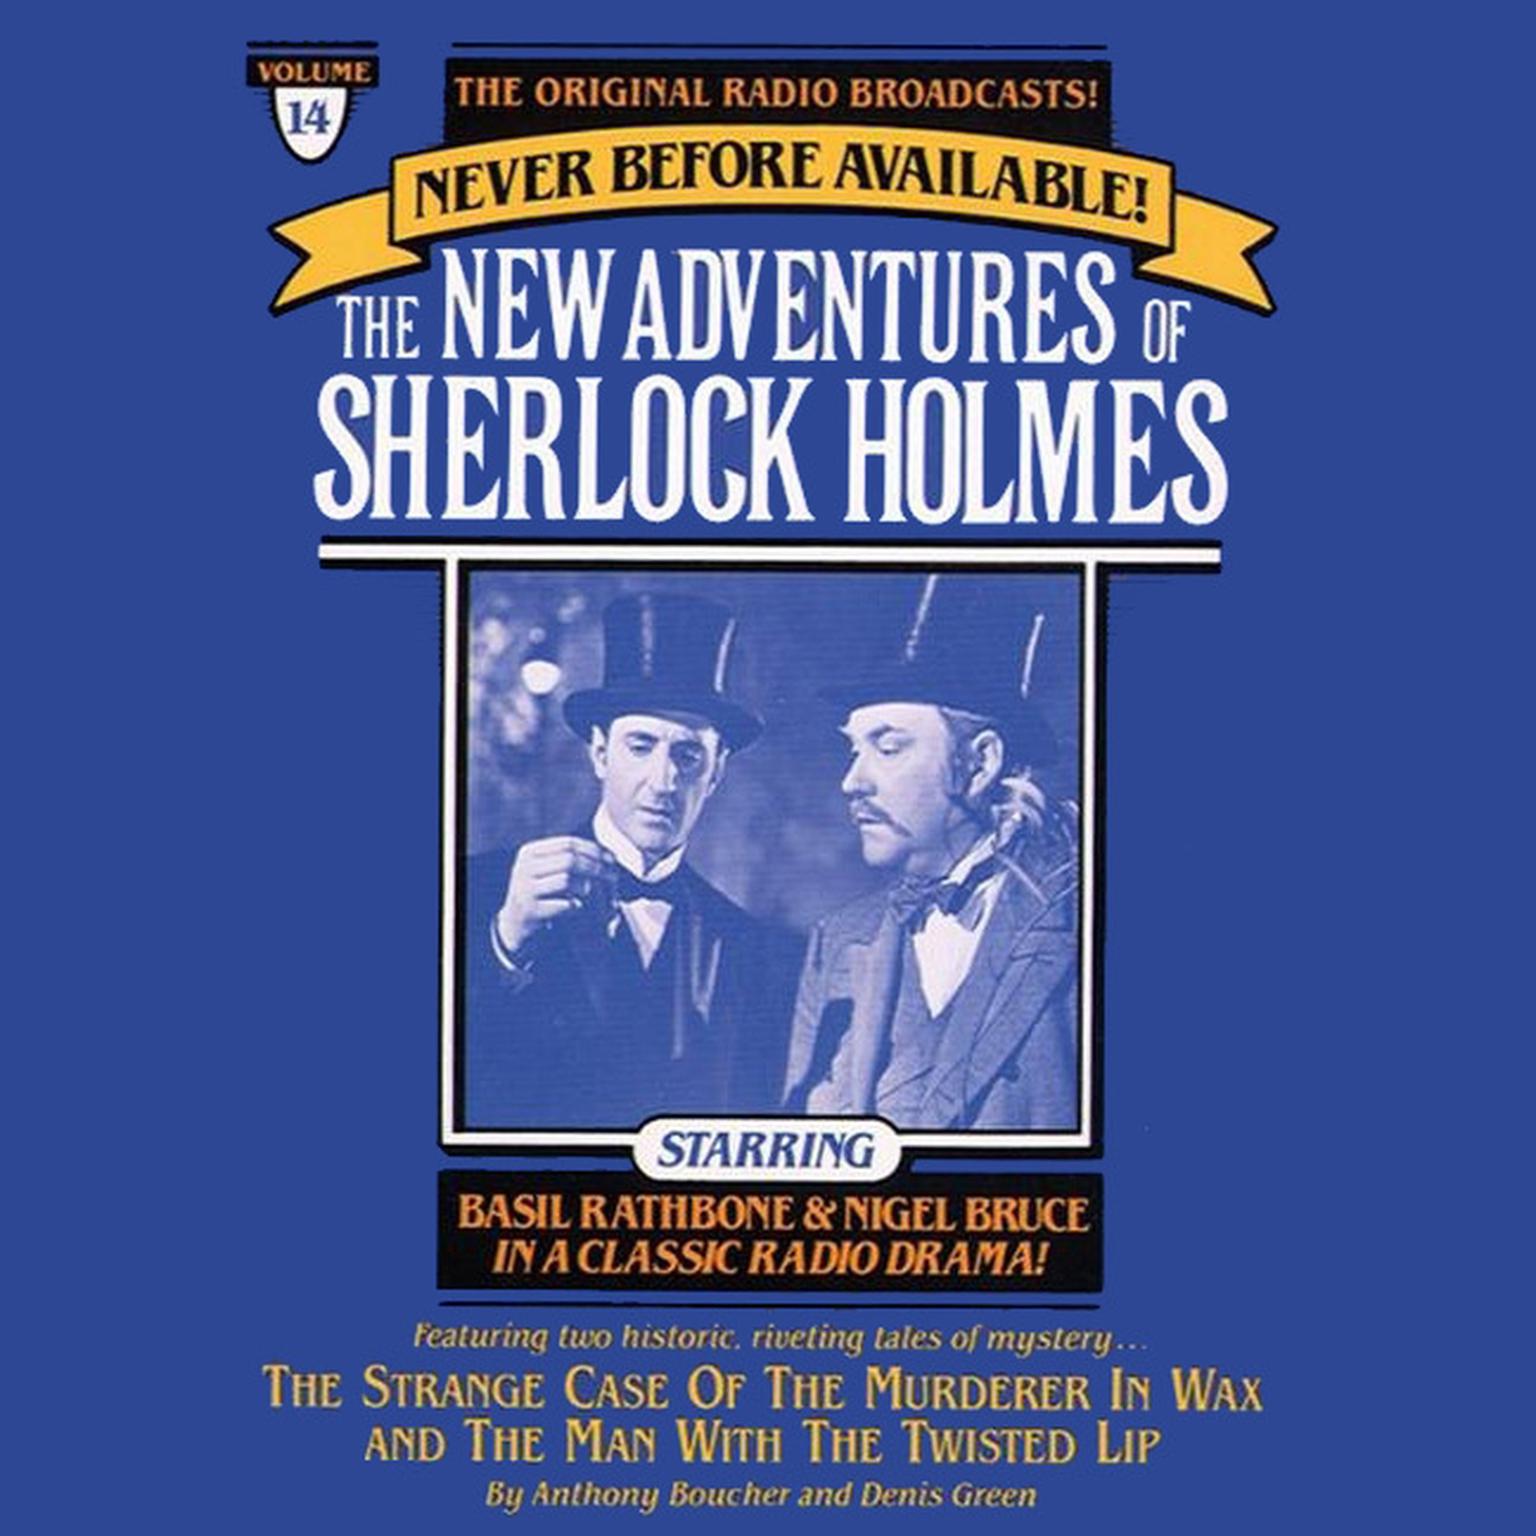 The Strange Case of the Murderer in Wax and The Man with the Twisted Lip (Abridged): The New Adventures of Sherlock Holmes, Episode 14 Audiobook, by Anthony Boucher